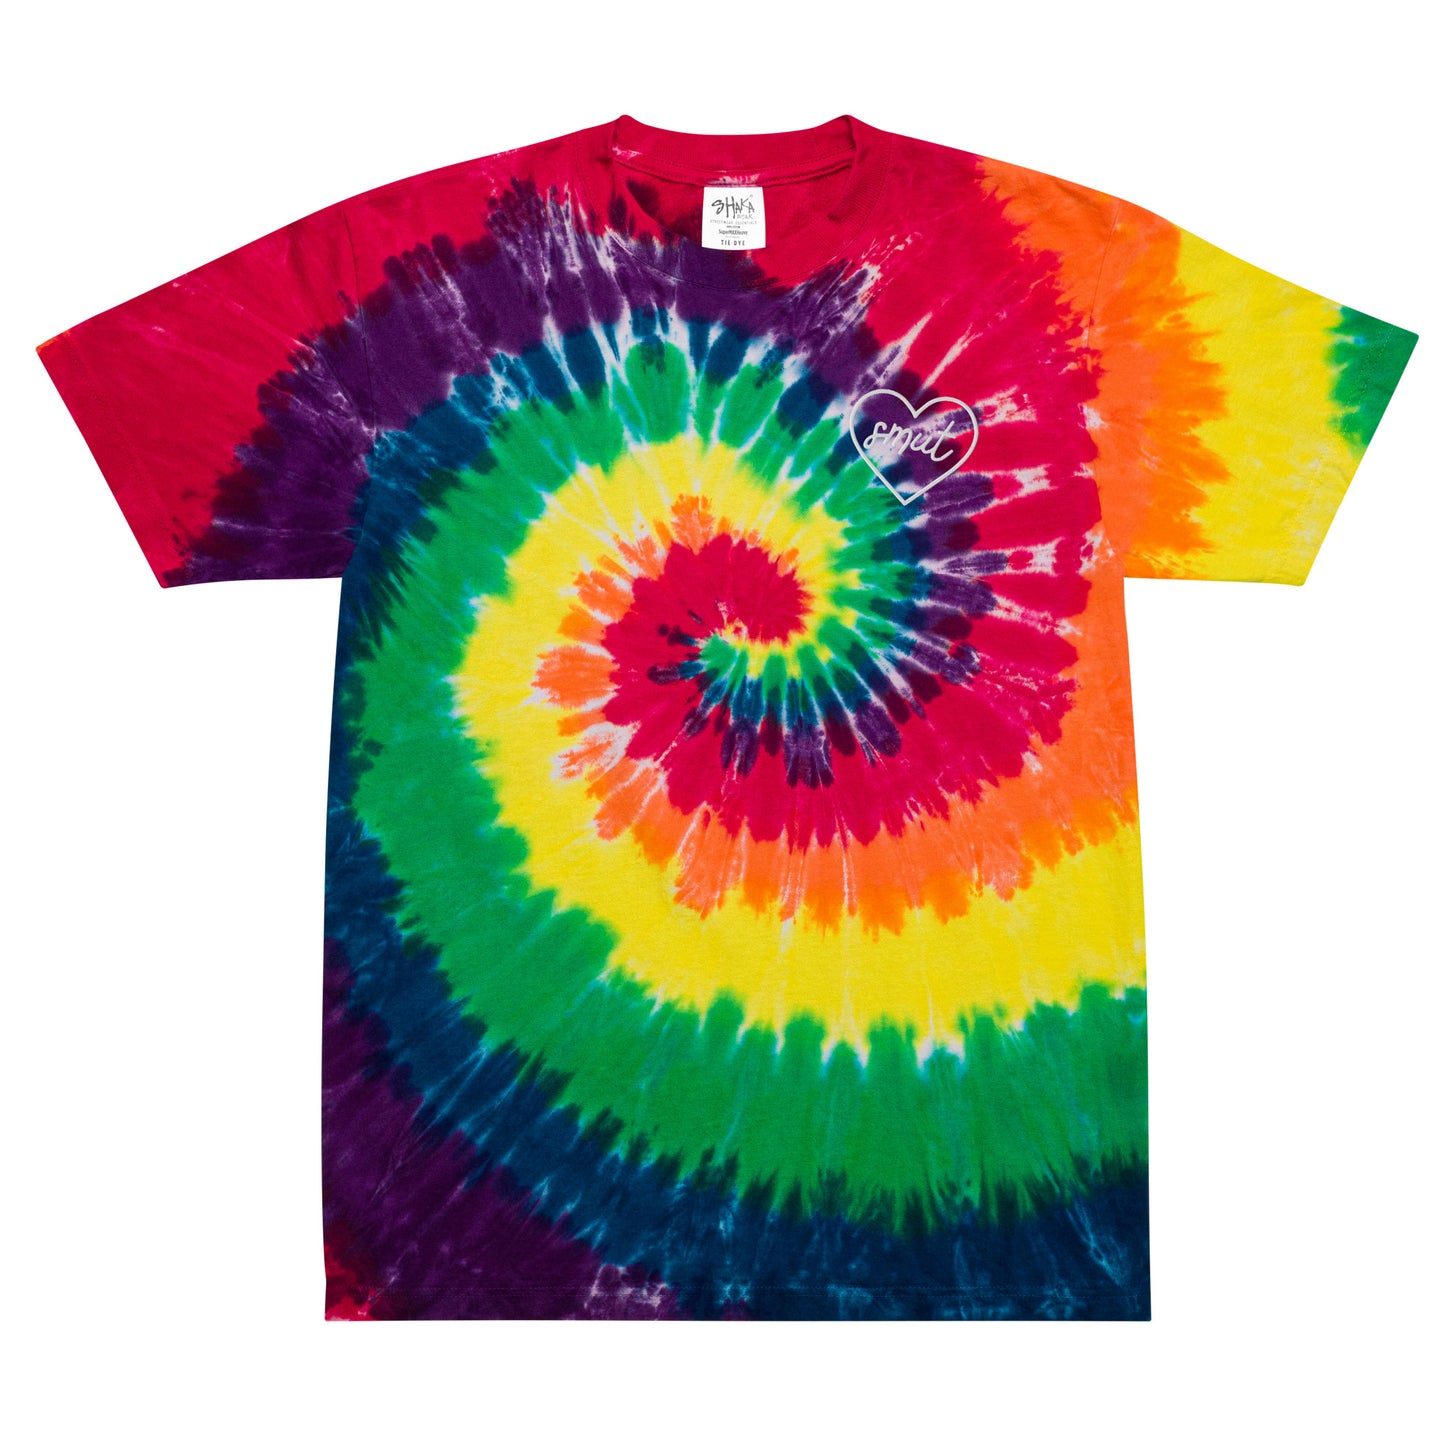 smut heart embroidered oversized tie-dye t-shirt – probably smut